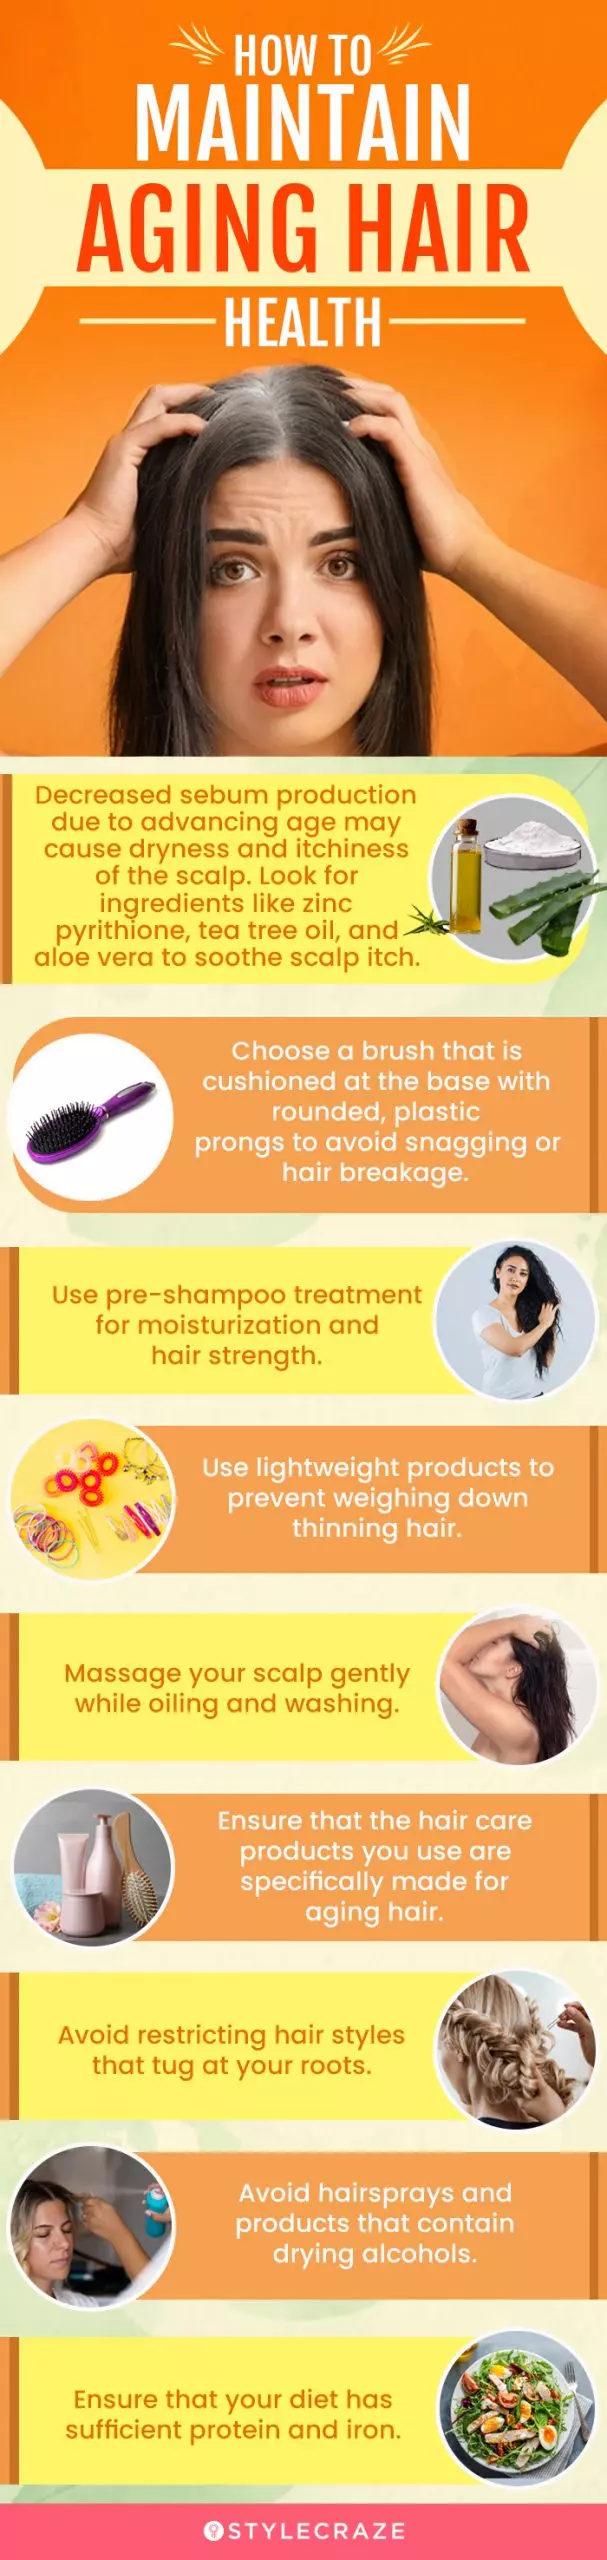 How To Maintain Aging Hair Health (infographic)